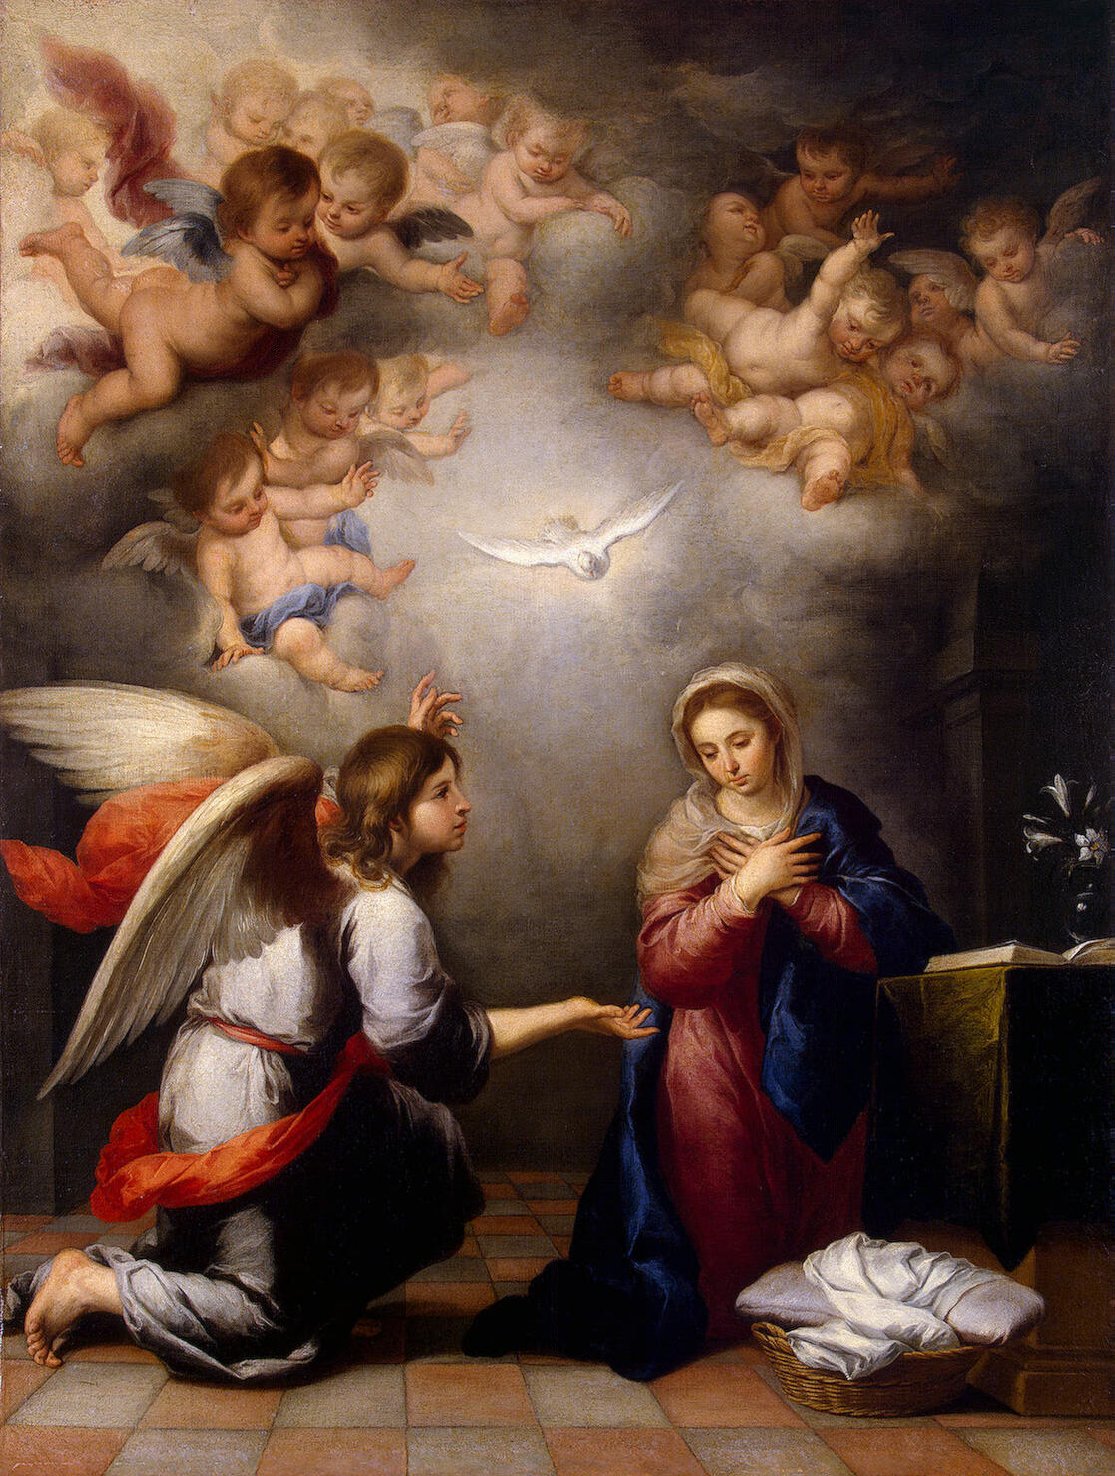 The Annunciation and the Blessed Virgin Mary. A Sermon by